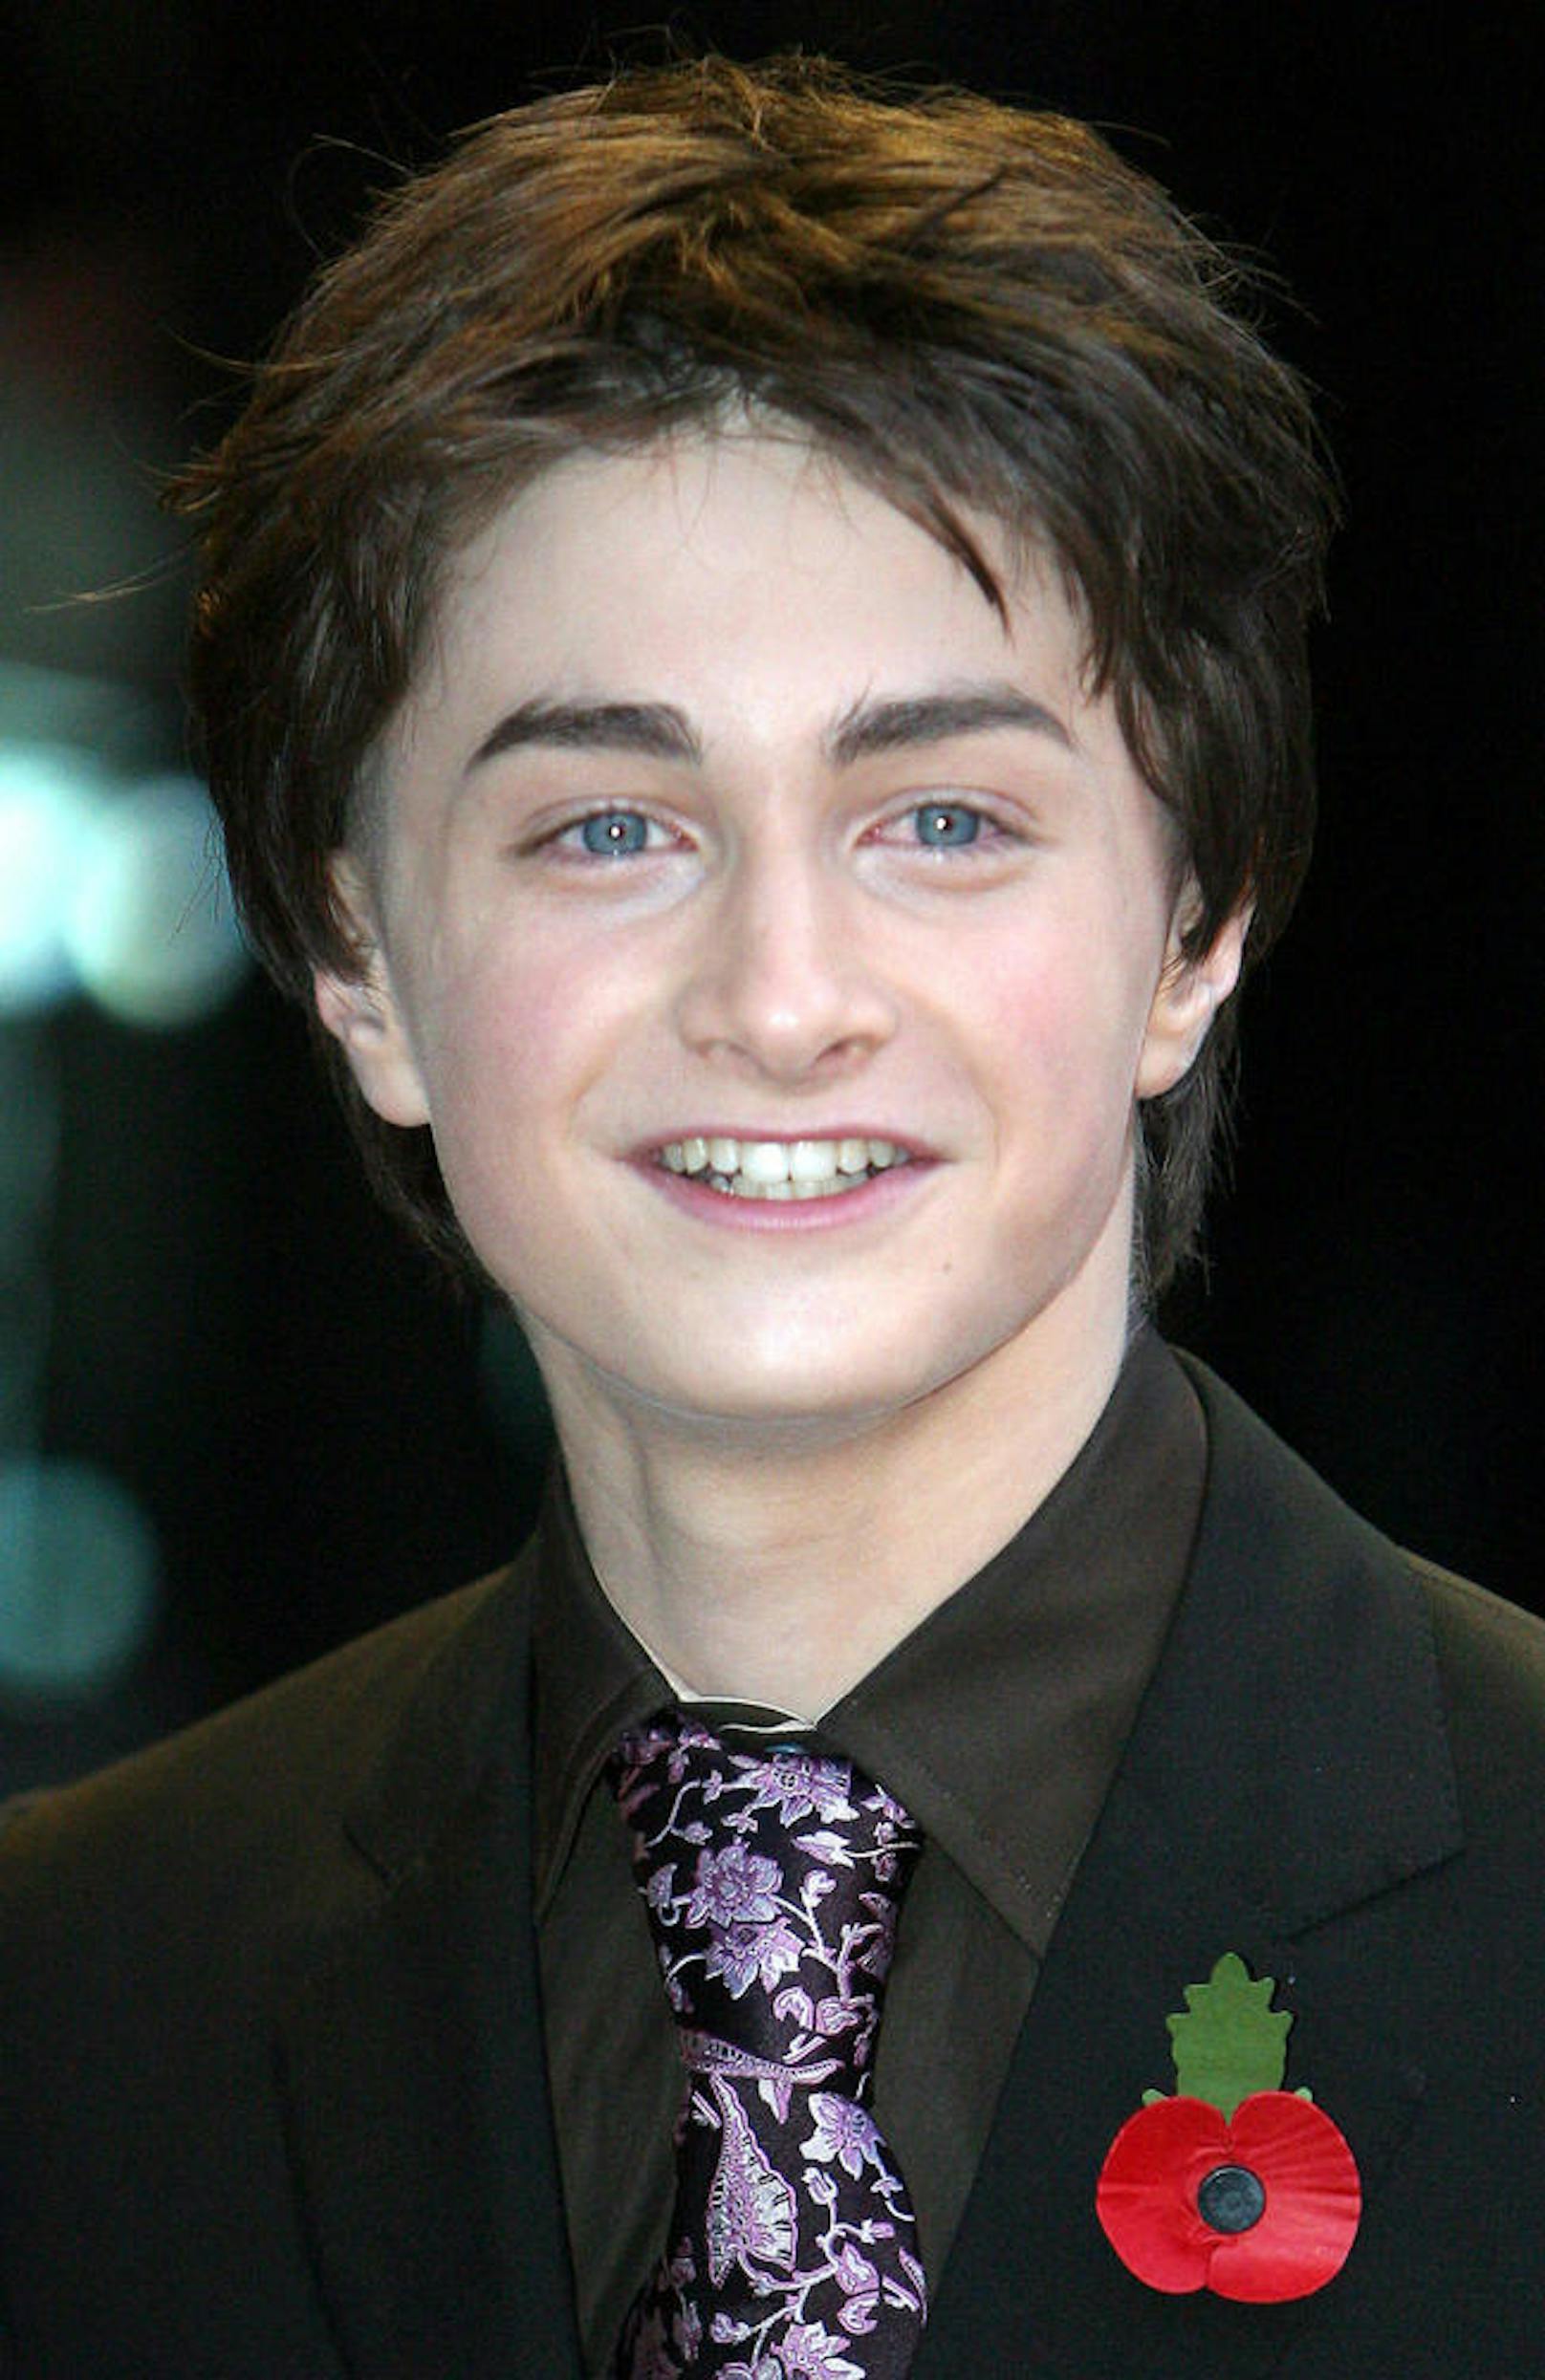 <b>Daniel Radcliff</b>e bei der Premiere von "Harry Potter and the Chamber of Secrets" in London, 2002.